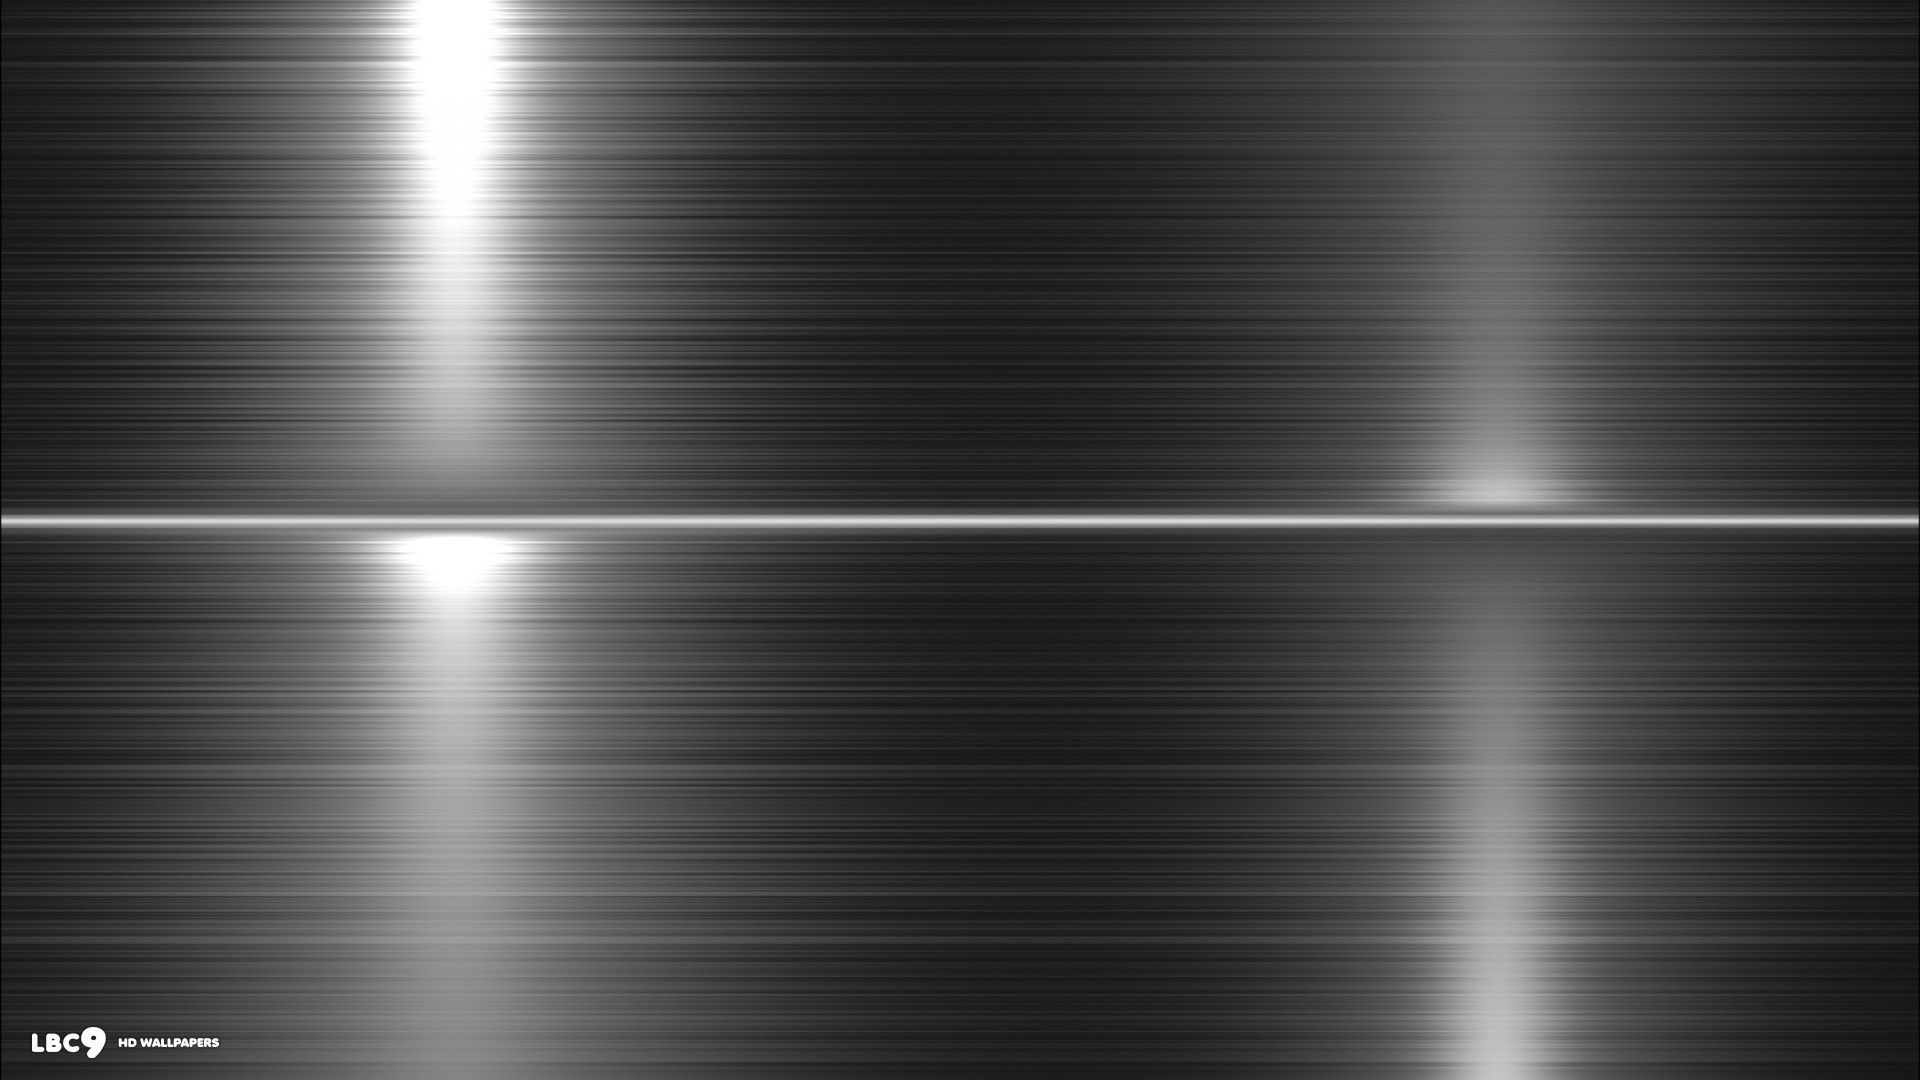 Black and white abstract lines wallpaper 5 / 6 abstract hd backgrounds